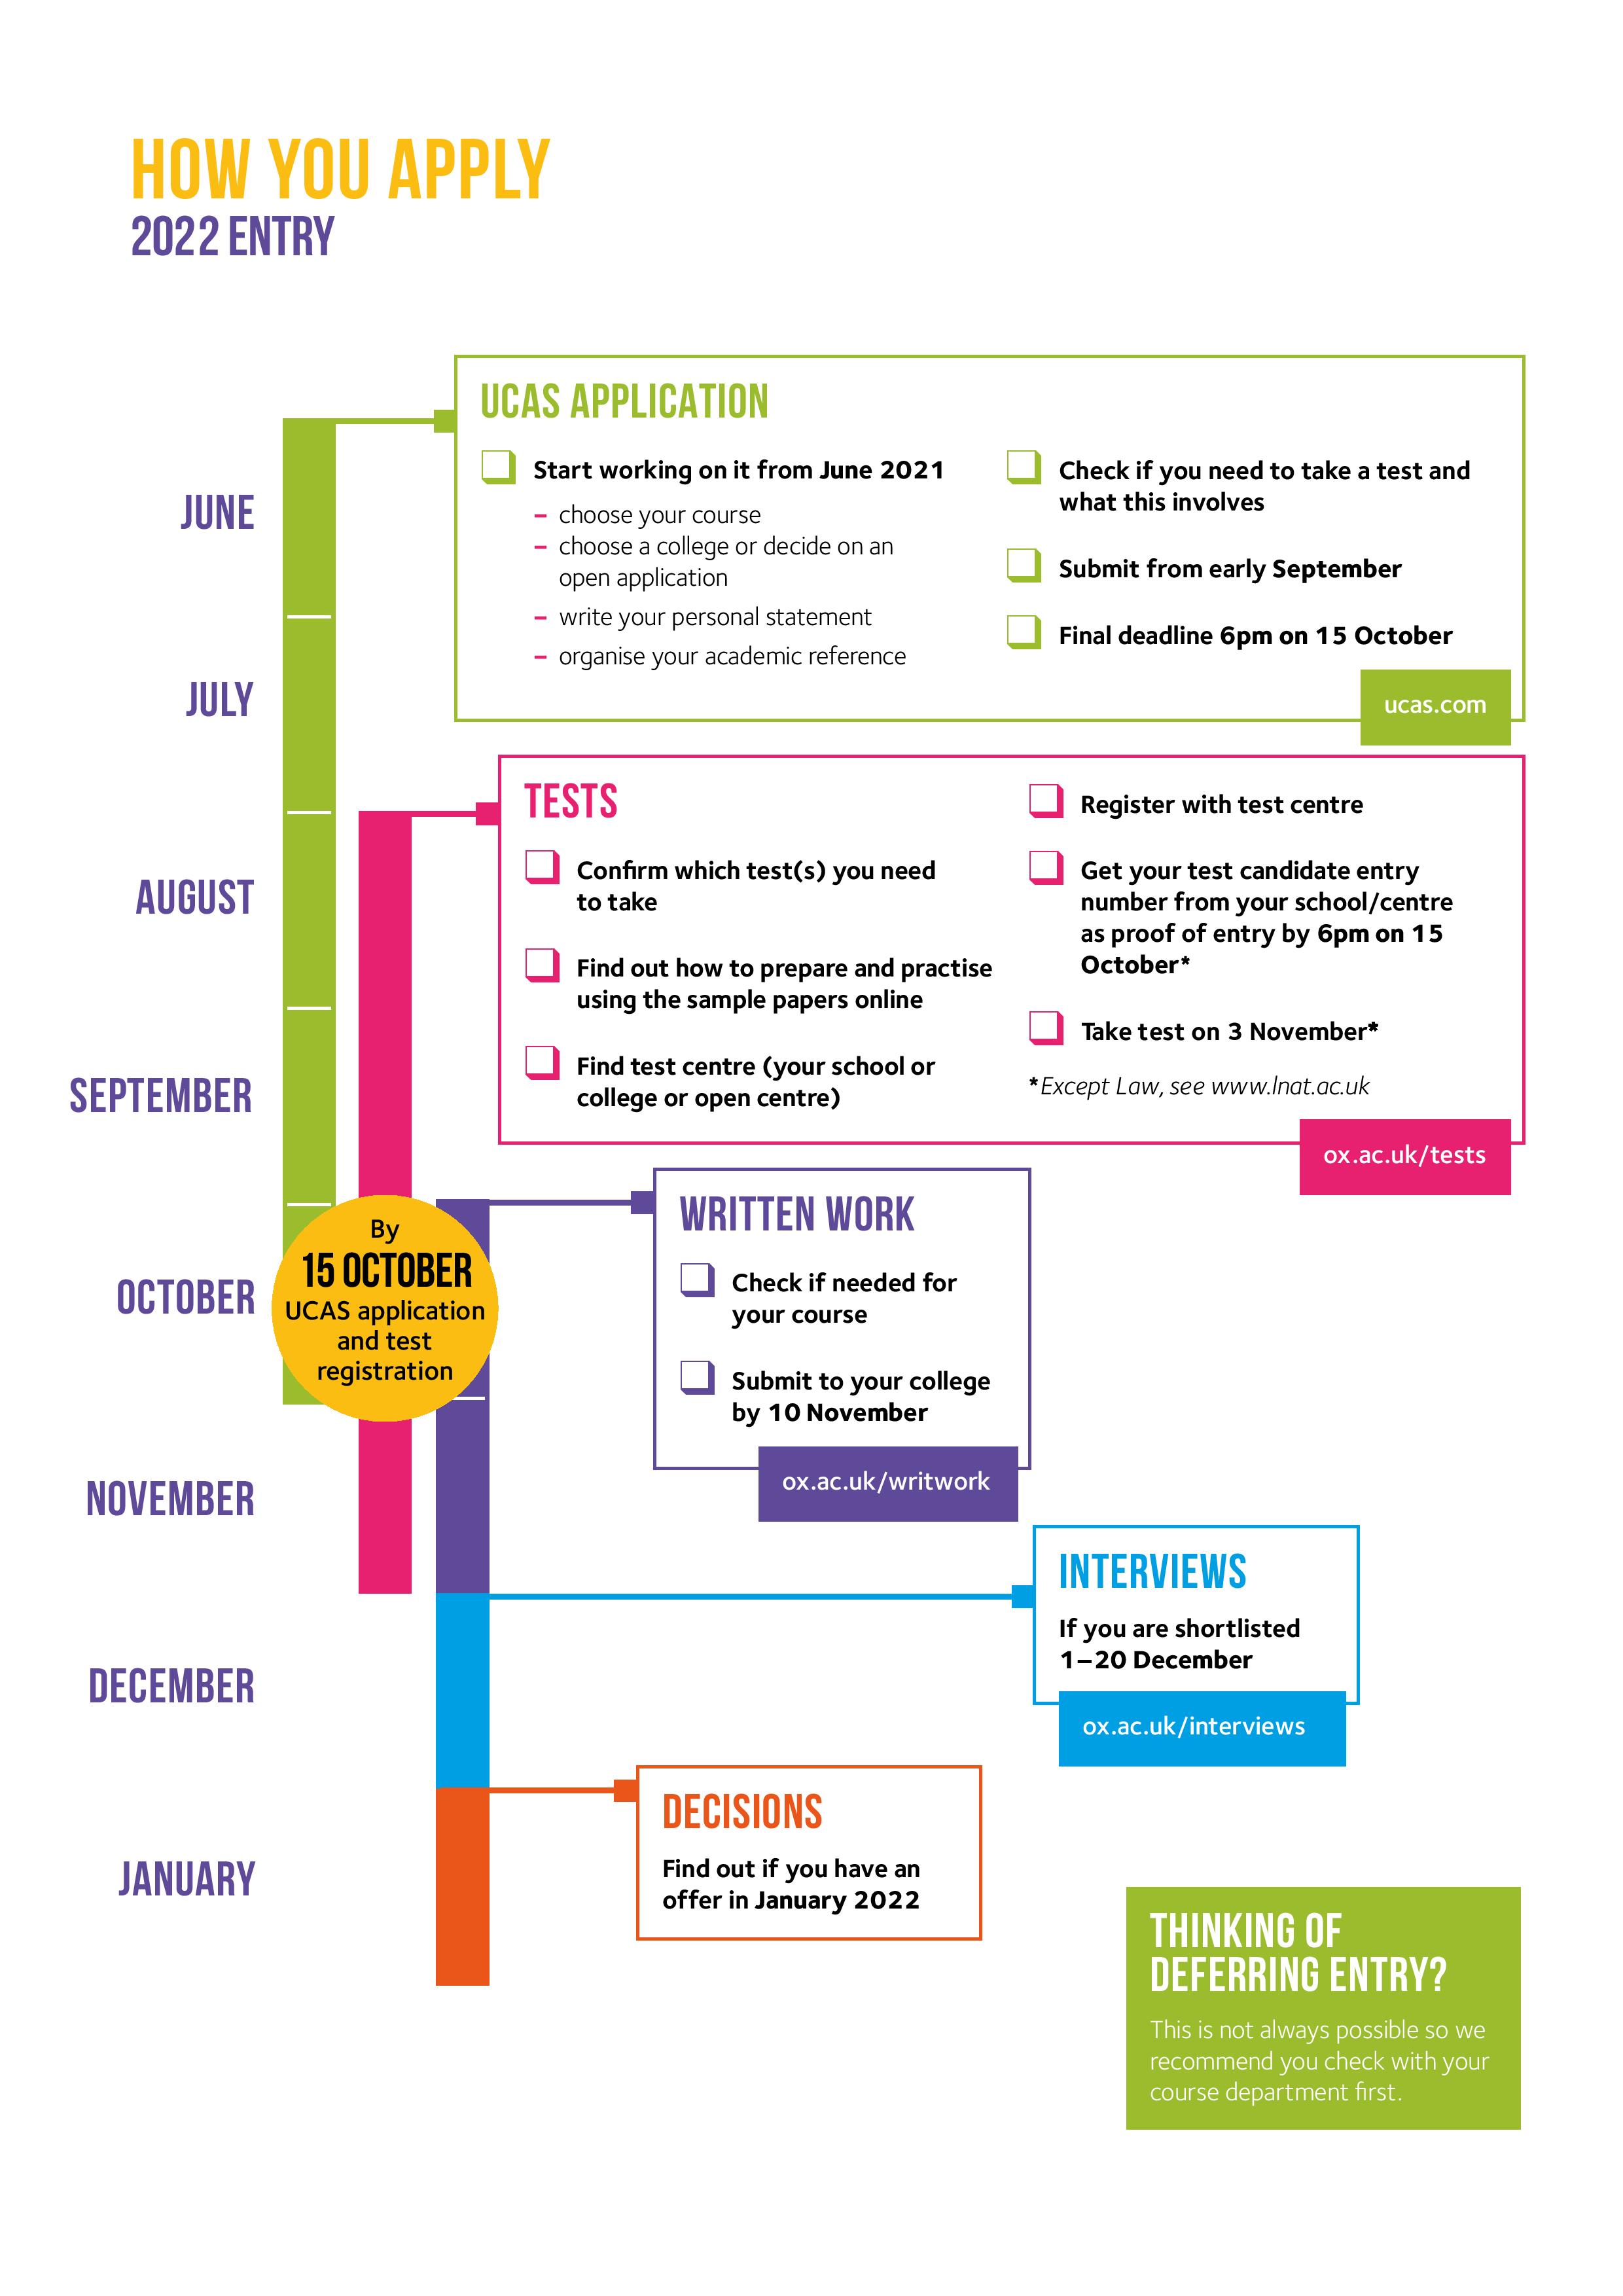 Image timeline of an application to Oxford